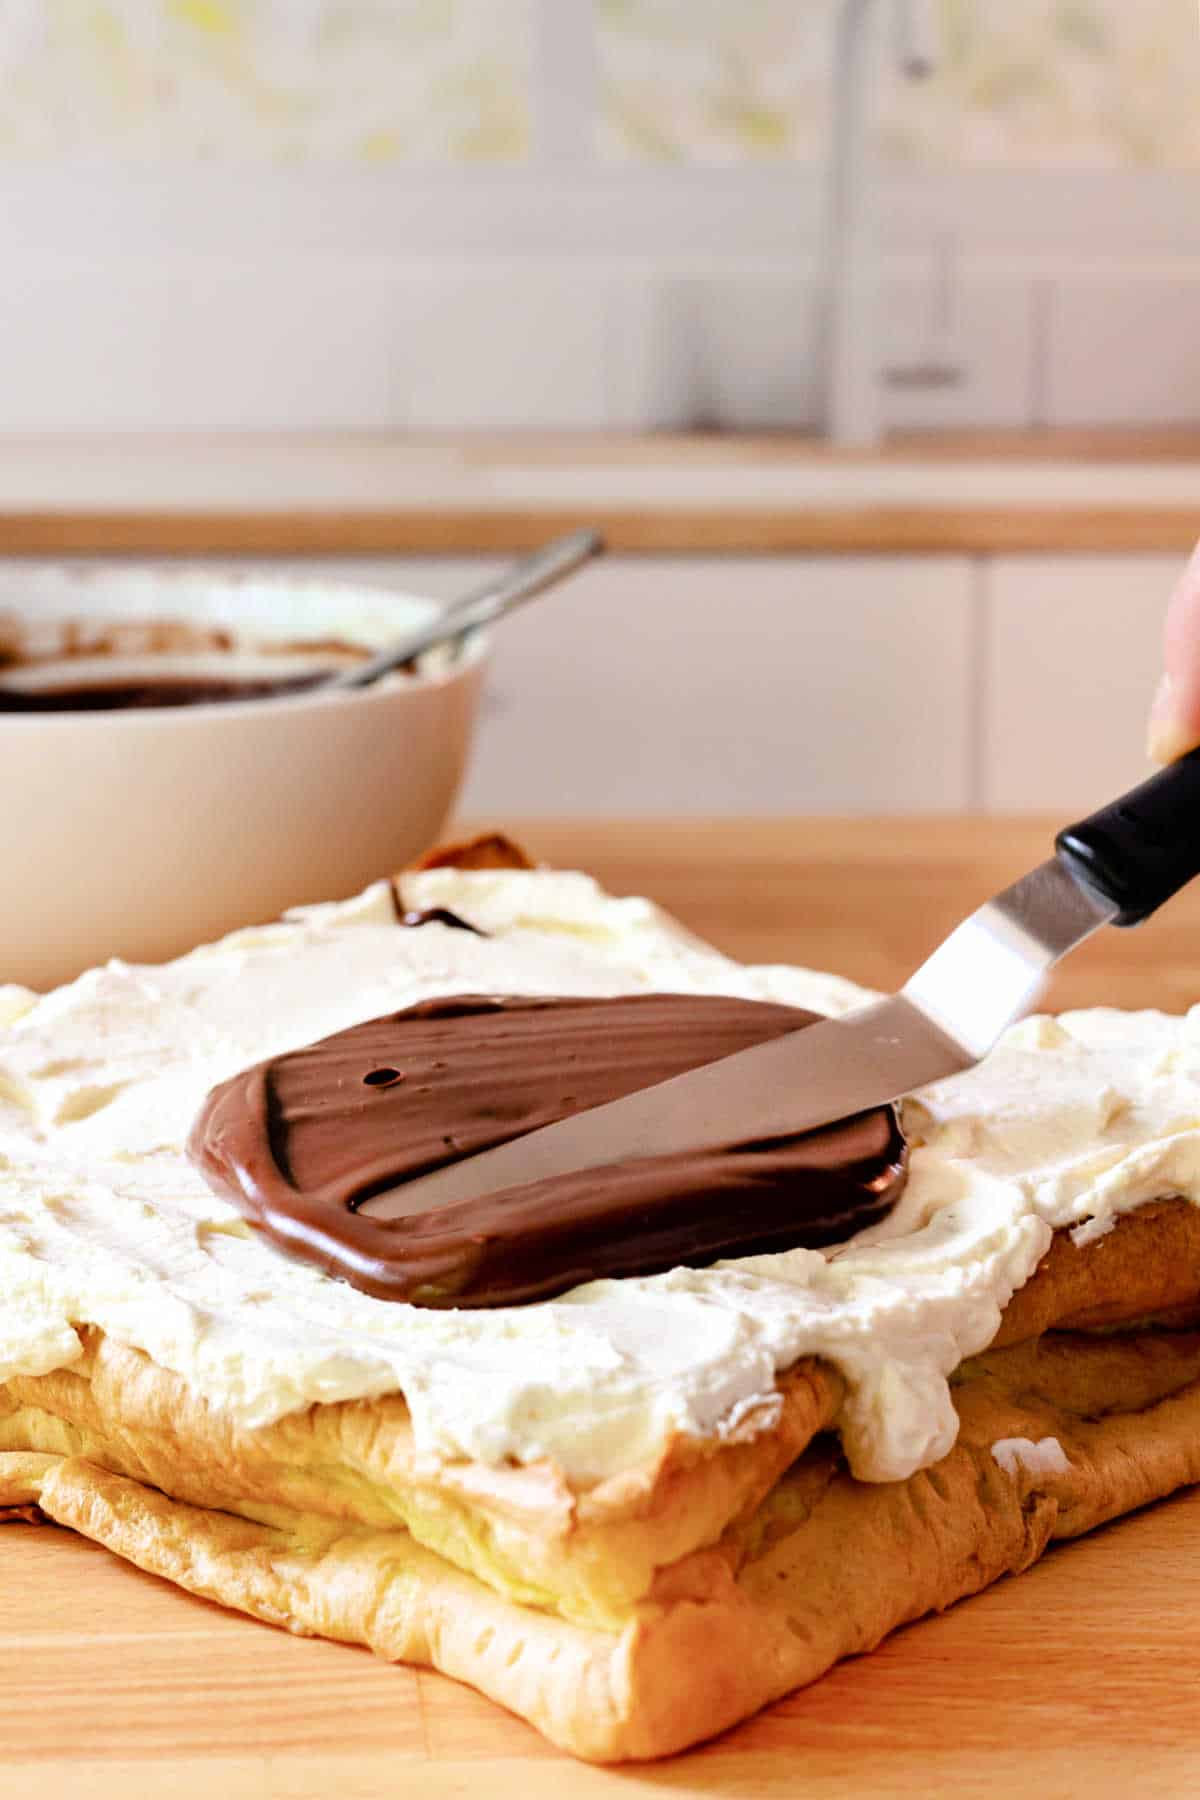 A square pastry spread with whipped cream. A small spatula is spreading chocolate ganache over the whpped cream, and there is a white bowl of ganache in the background.